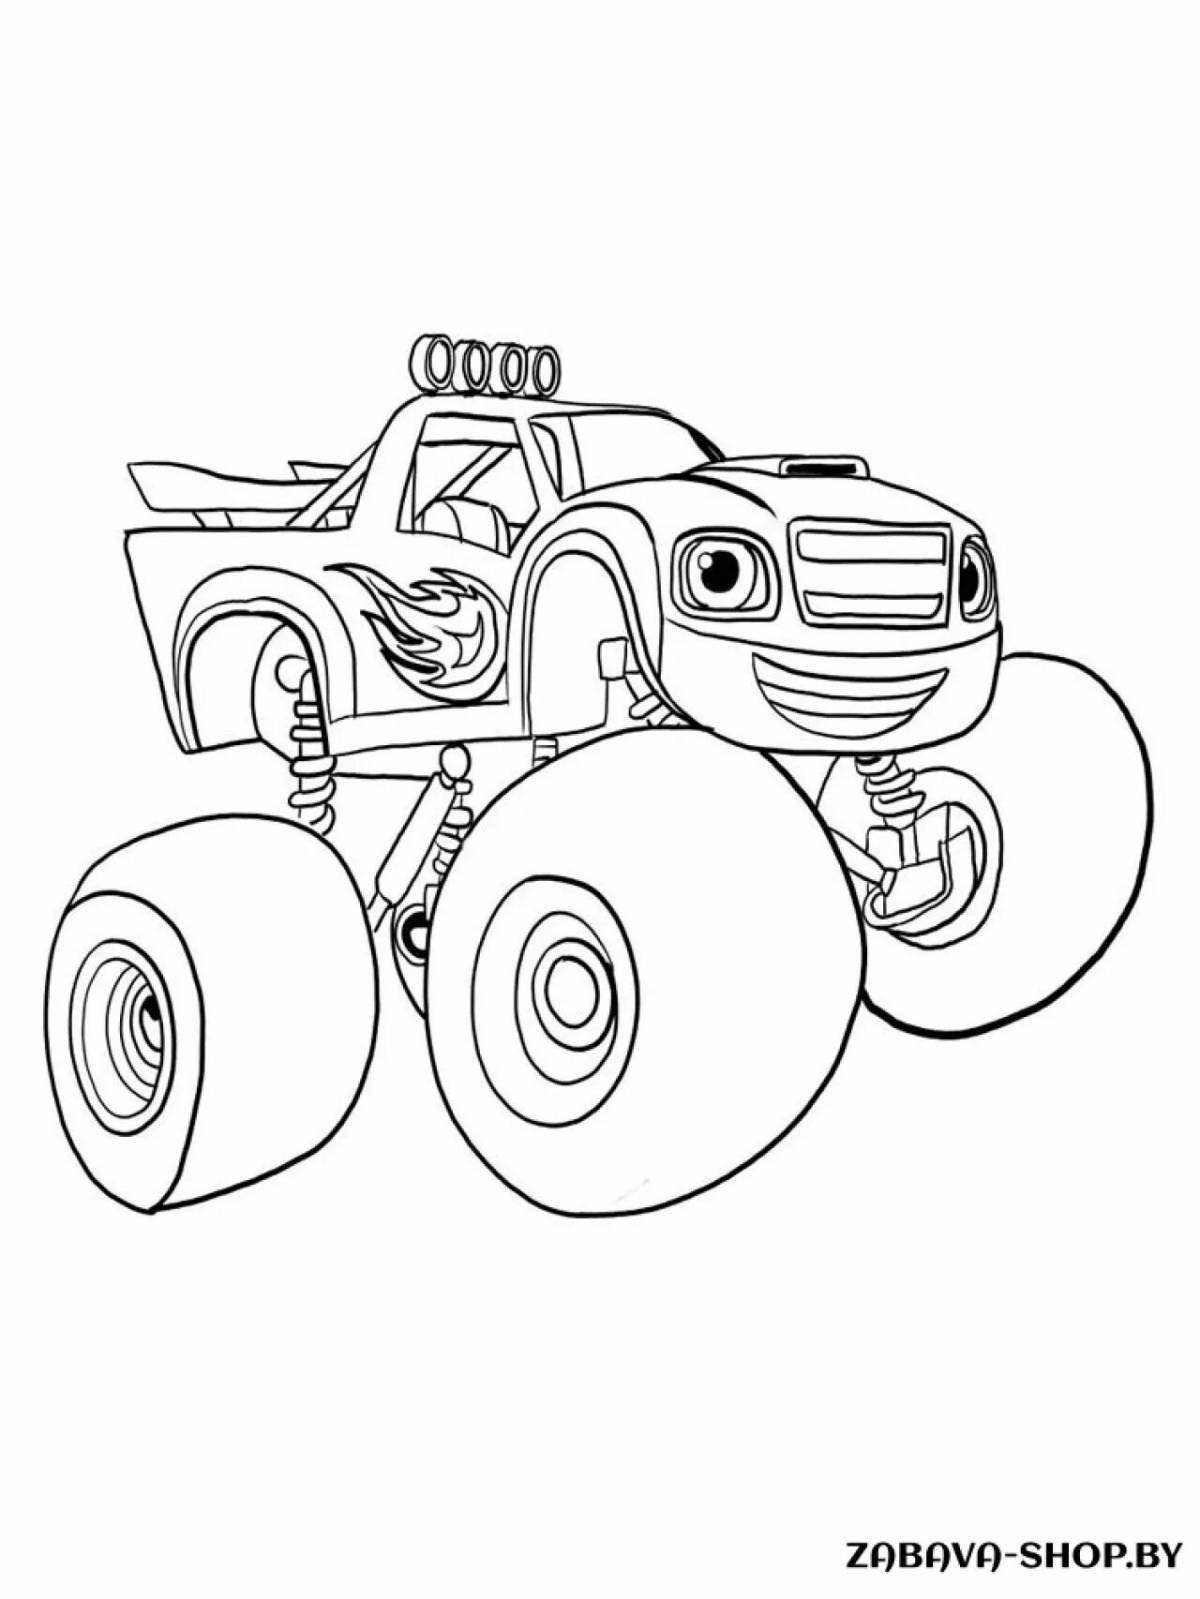 Radiant flash and wonder cars coloring pages for kids